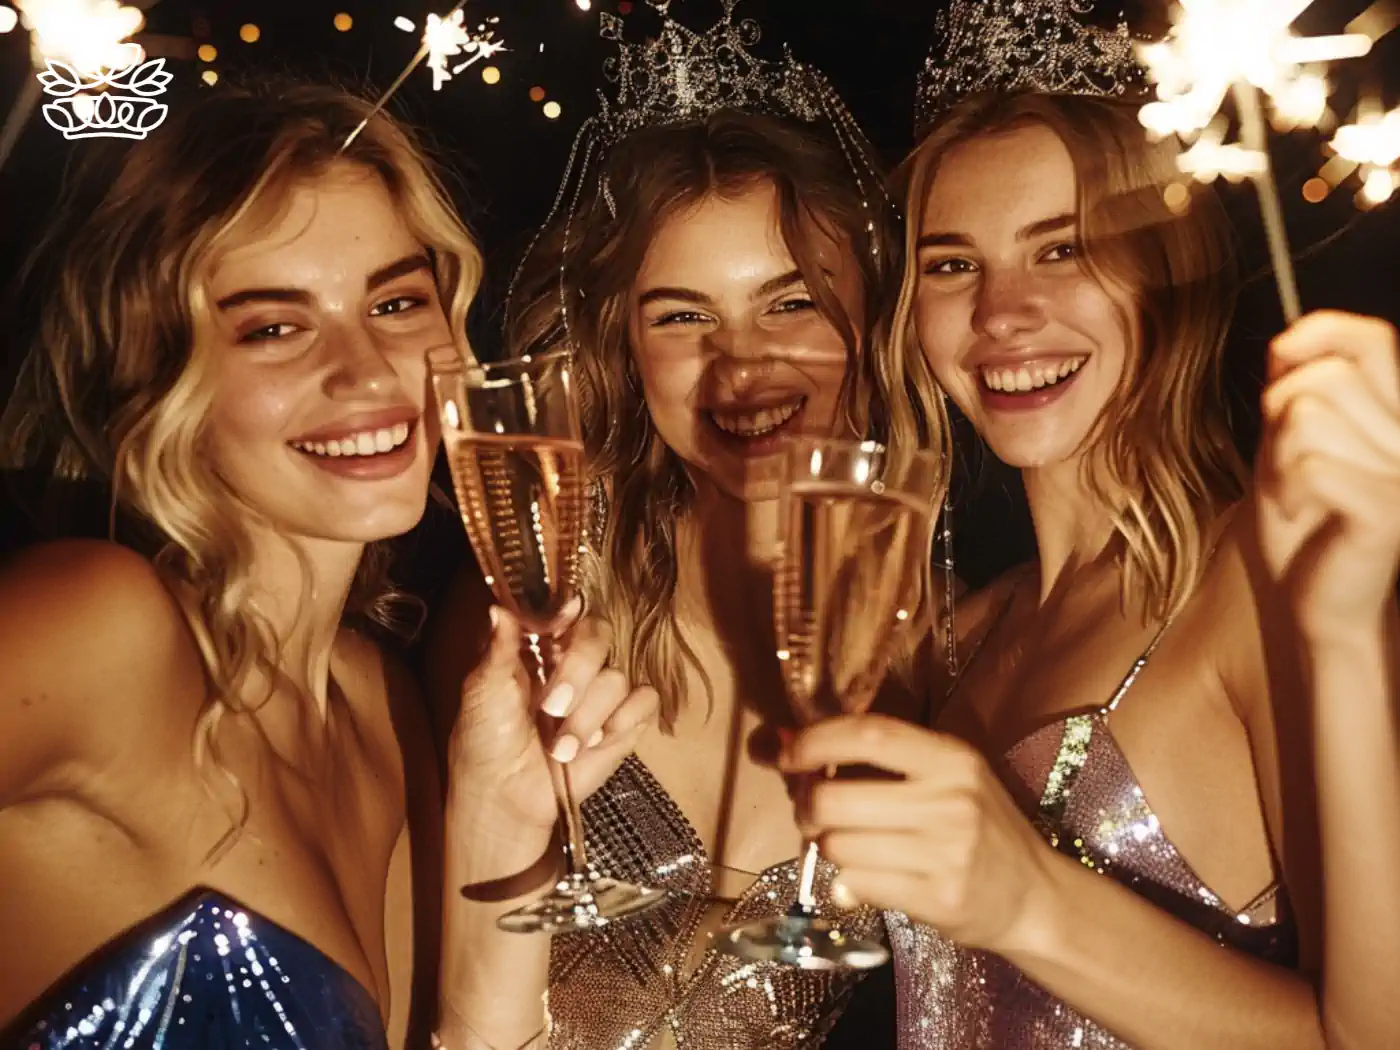 Three jubilant friends toasting with champagne, adorned in sparkling attire and tiaras, radiating joy, embodying the celebratory spirit of Fabulous Flowers and Gifts.